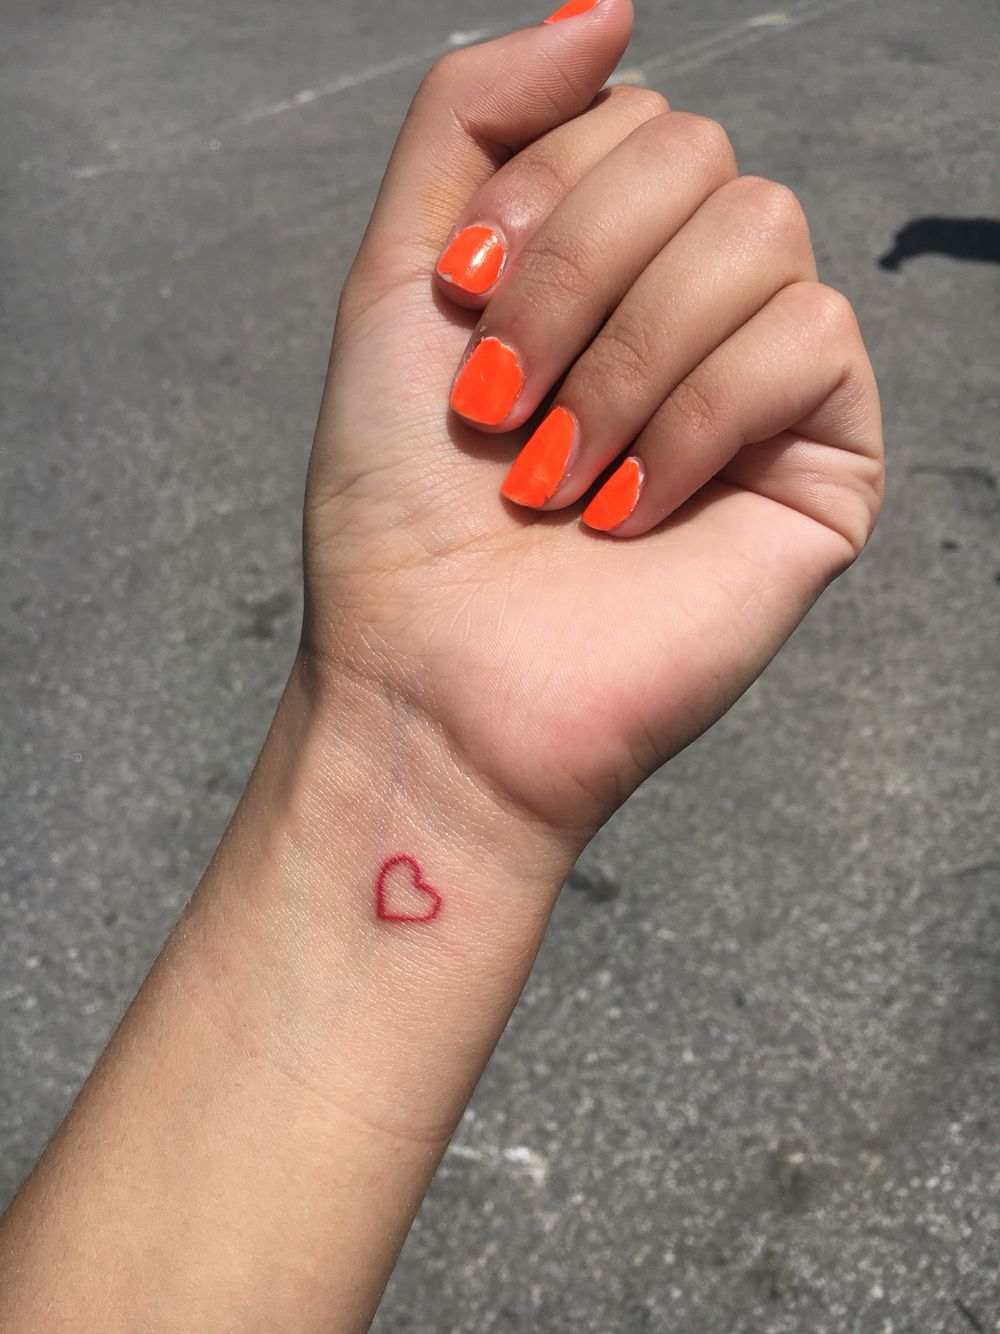 Rotate Tattoos In Small Format With Idea For A Hand On The Handle